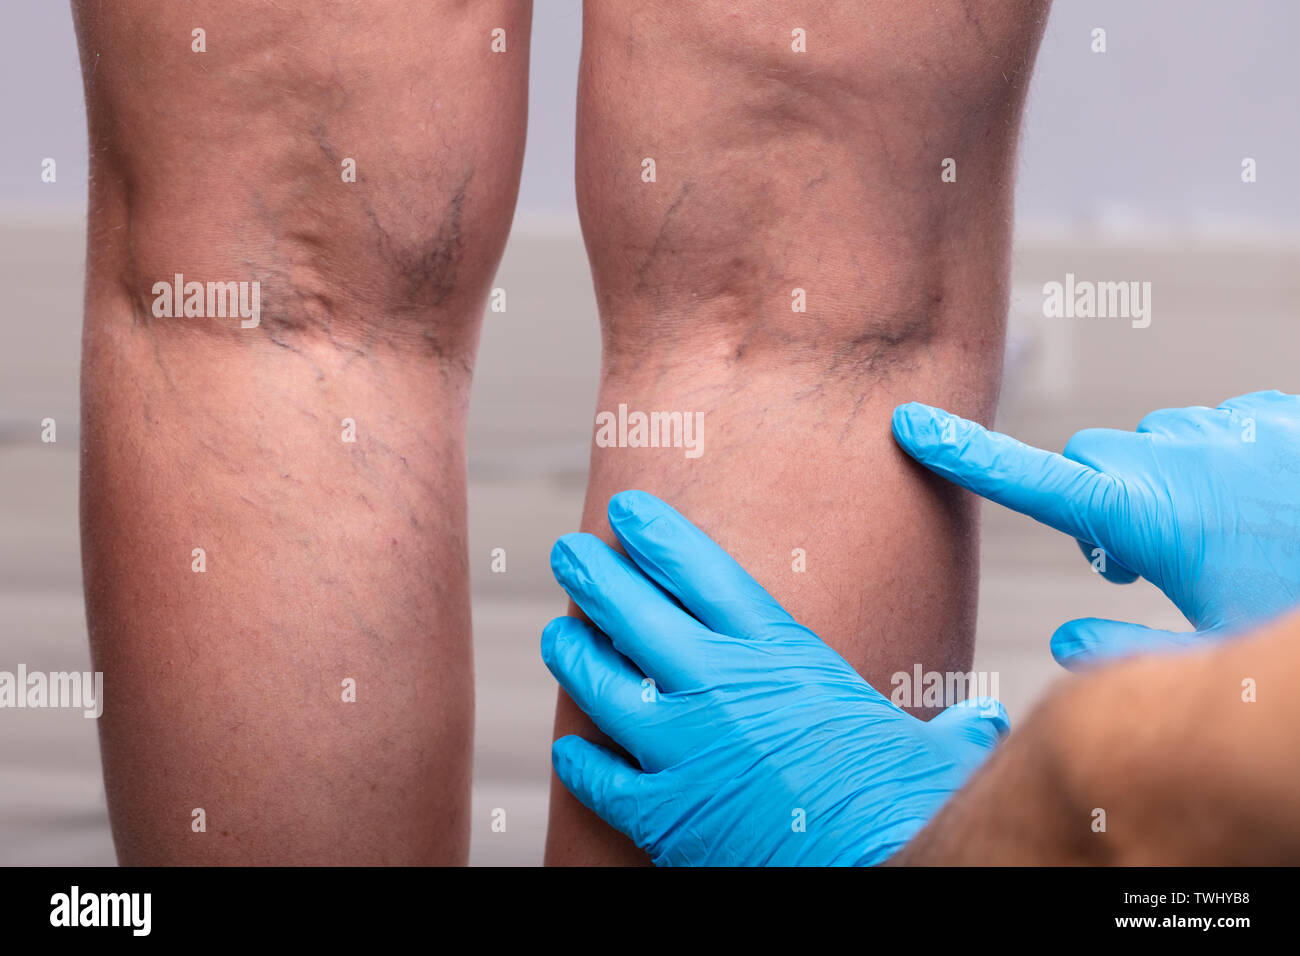 Medic With Blue Latex Surgical Gloves Touching Varicose Veins On Patient's Leg Stock Photo